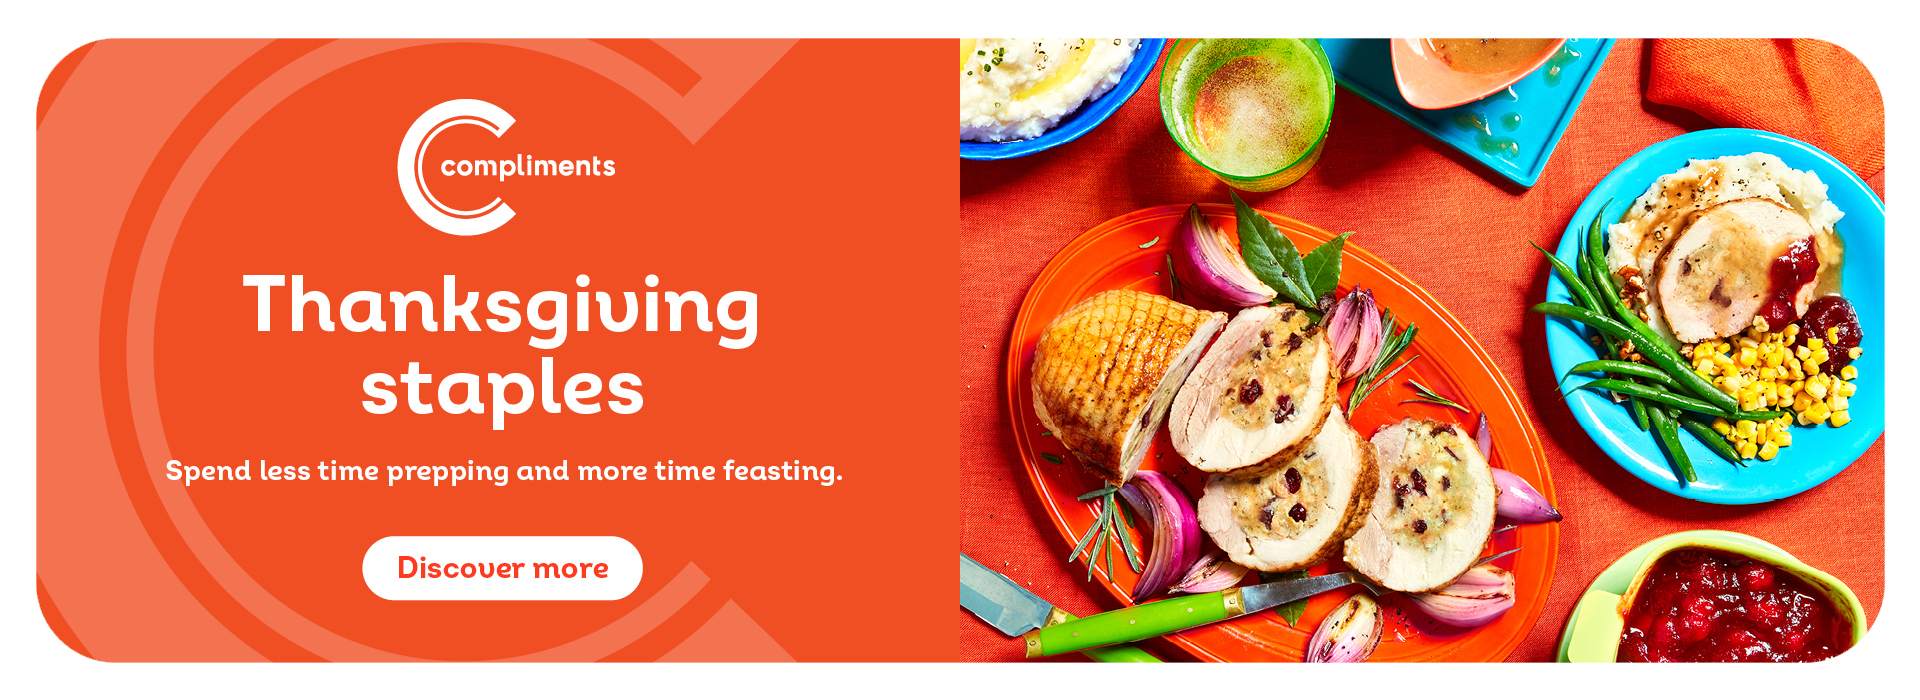 Text Reading 'Compliments Thanksgiving staples. Spend less time prepping and more time feasting. Click on the button below to 'Discover more'.'